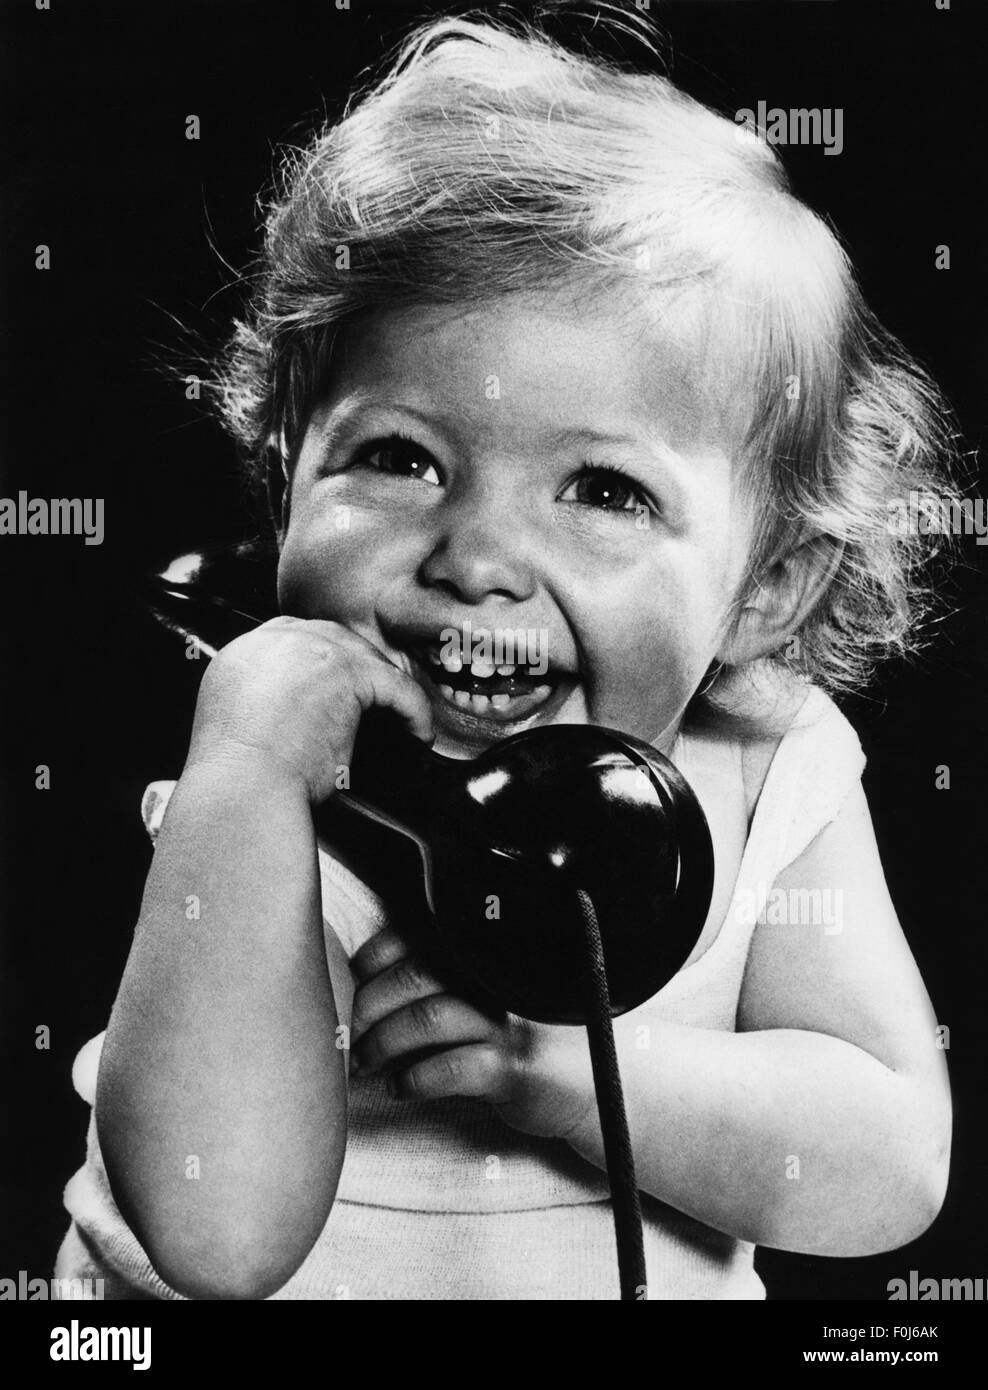 people, children, portrait - girls, little girl phoning, 1960s, Additional-Rights-Clearences-Not Available Stock Photo